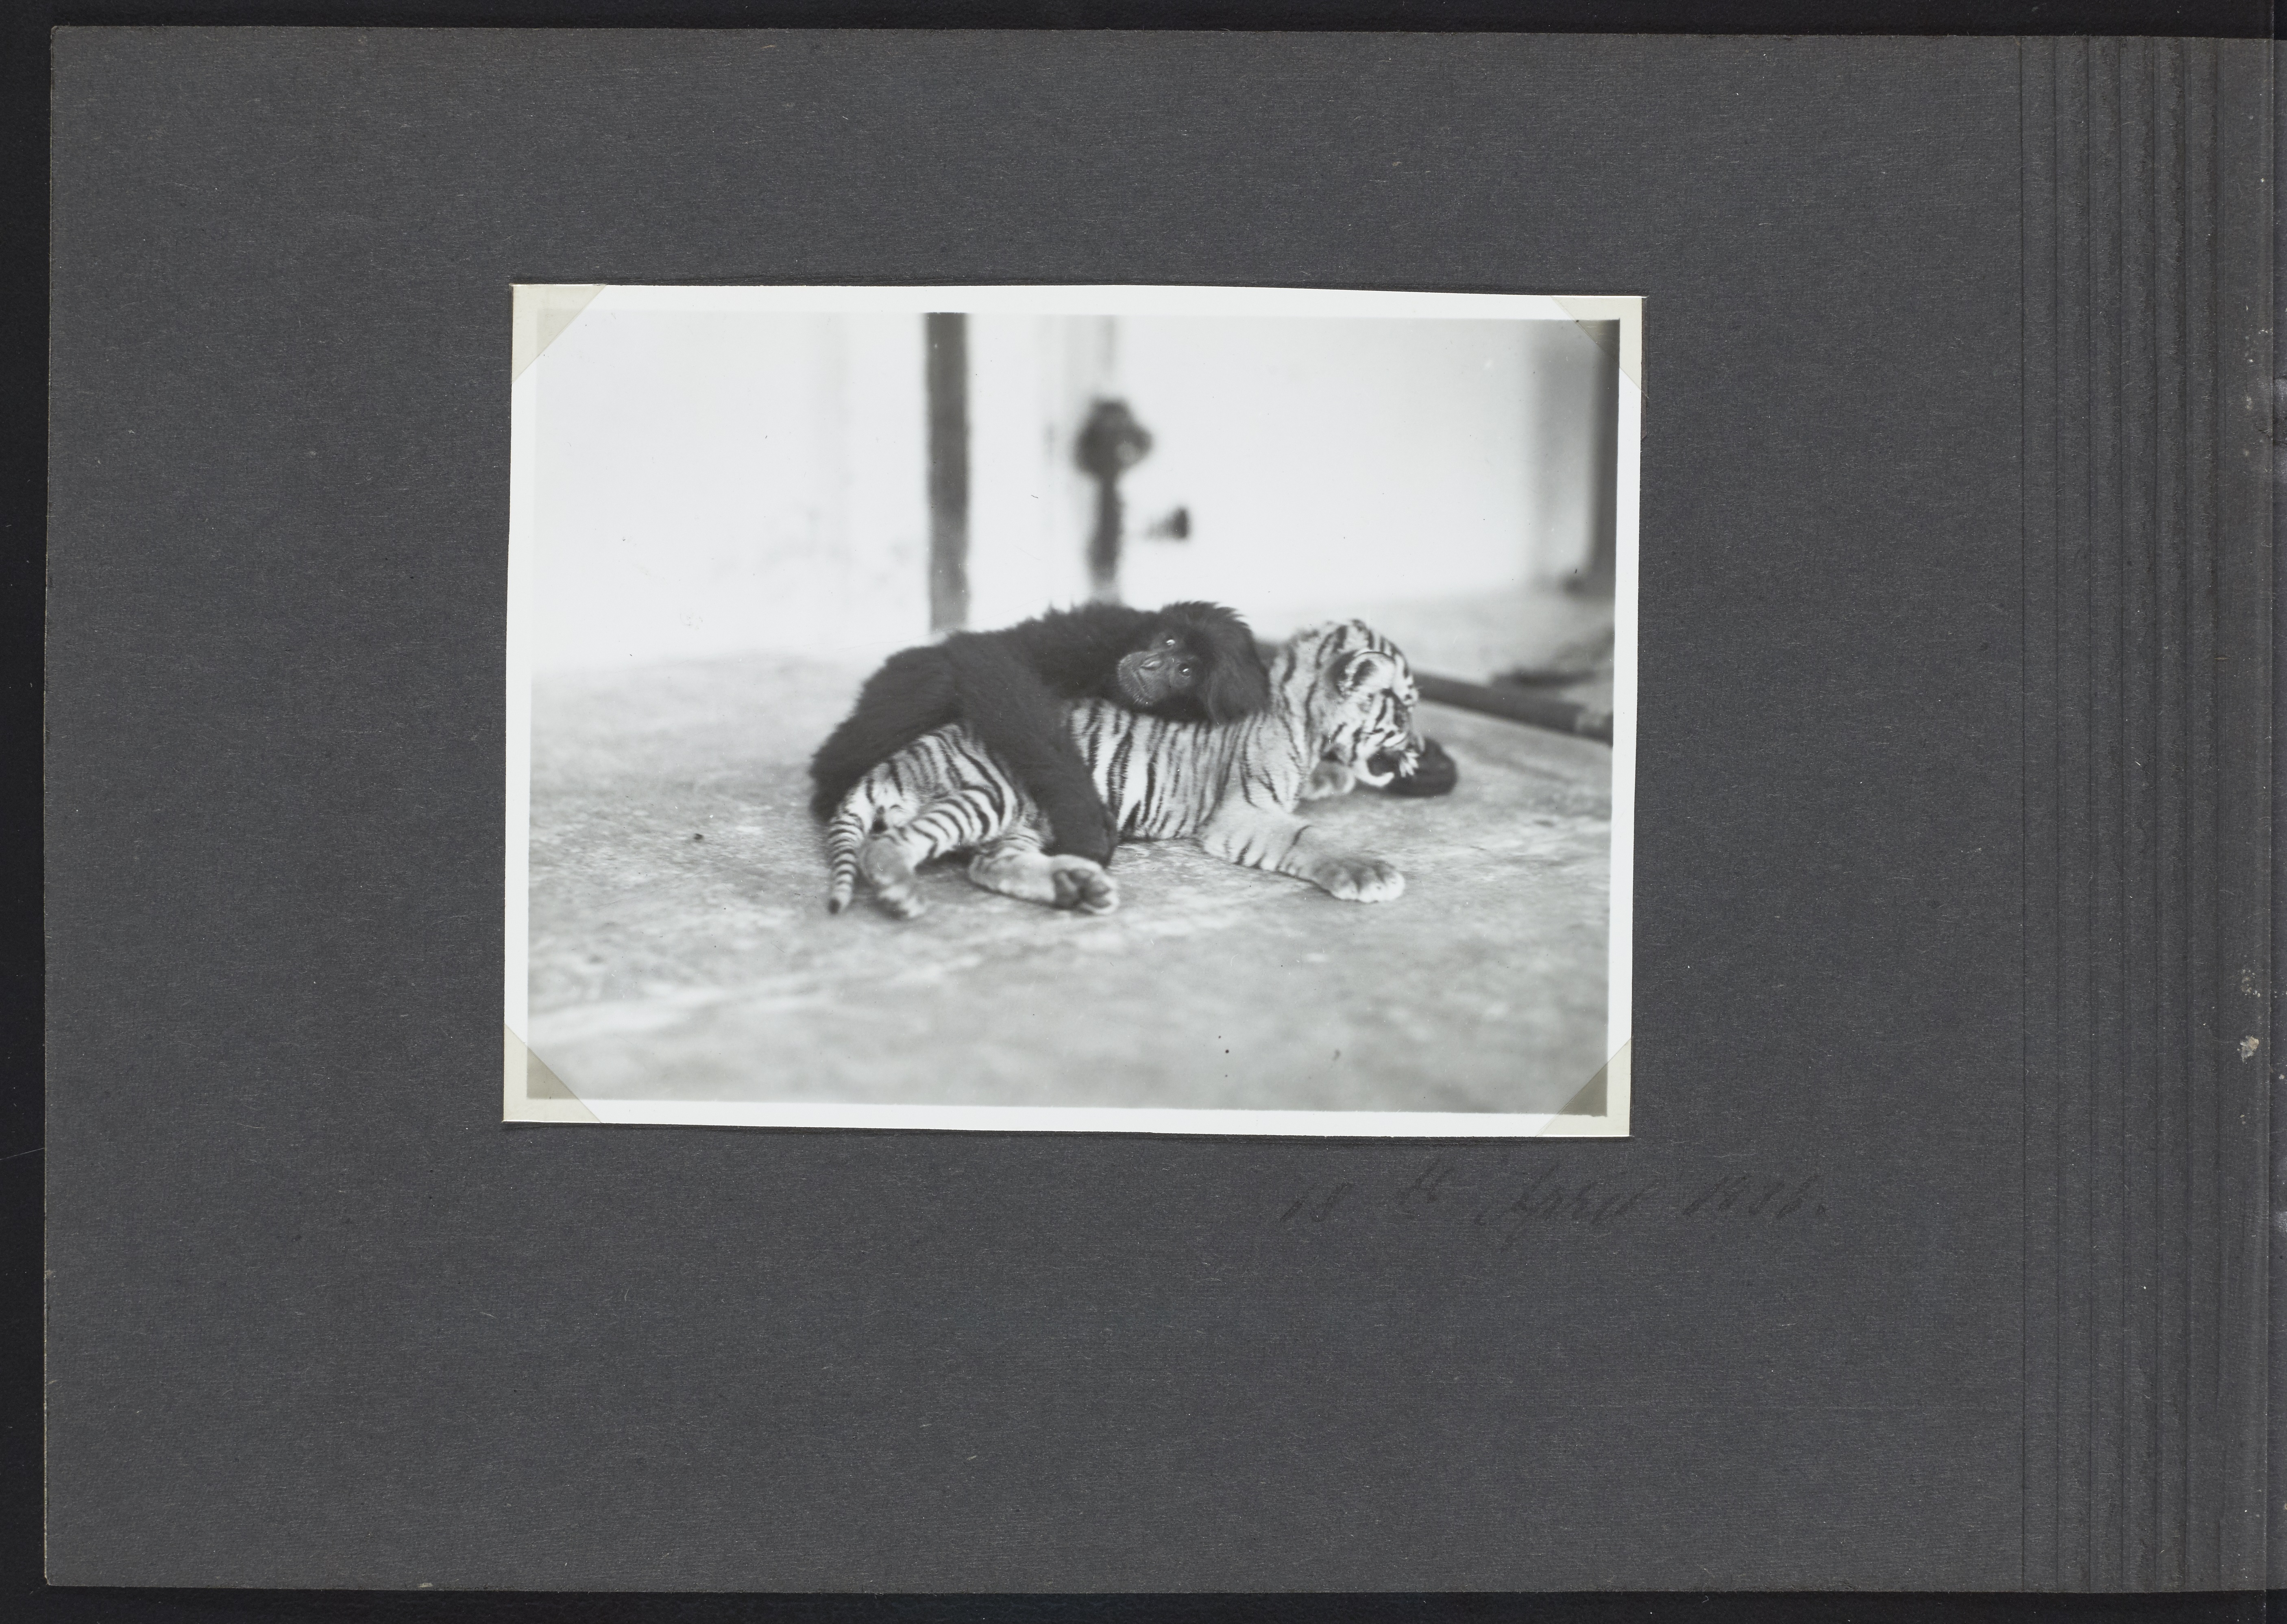 A photo of a monkey and a tiger, taken on the National Geographic Society-Smithsonian Institution Expedition to the Dutch East Indies, 1937. 